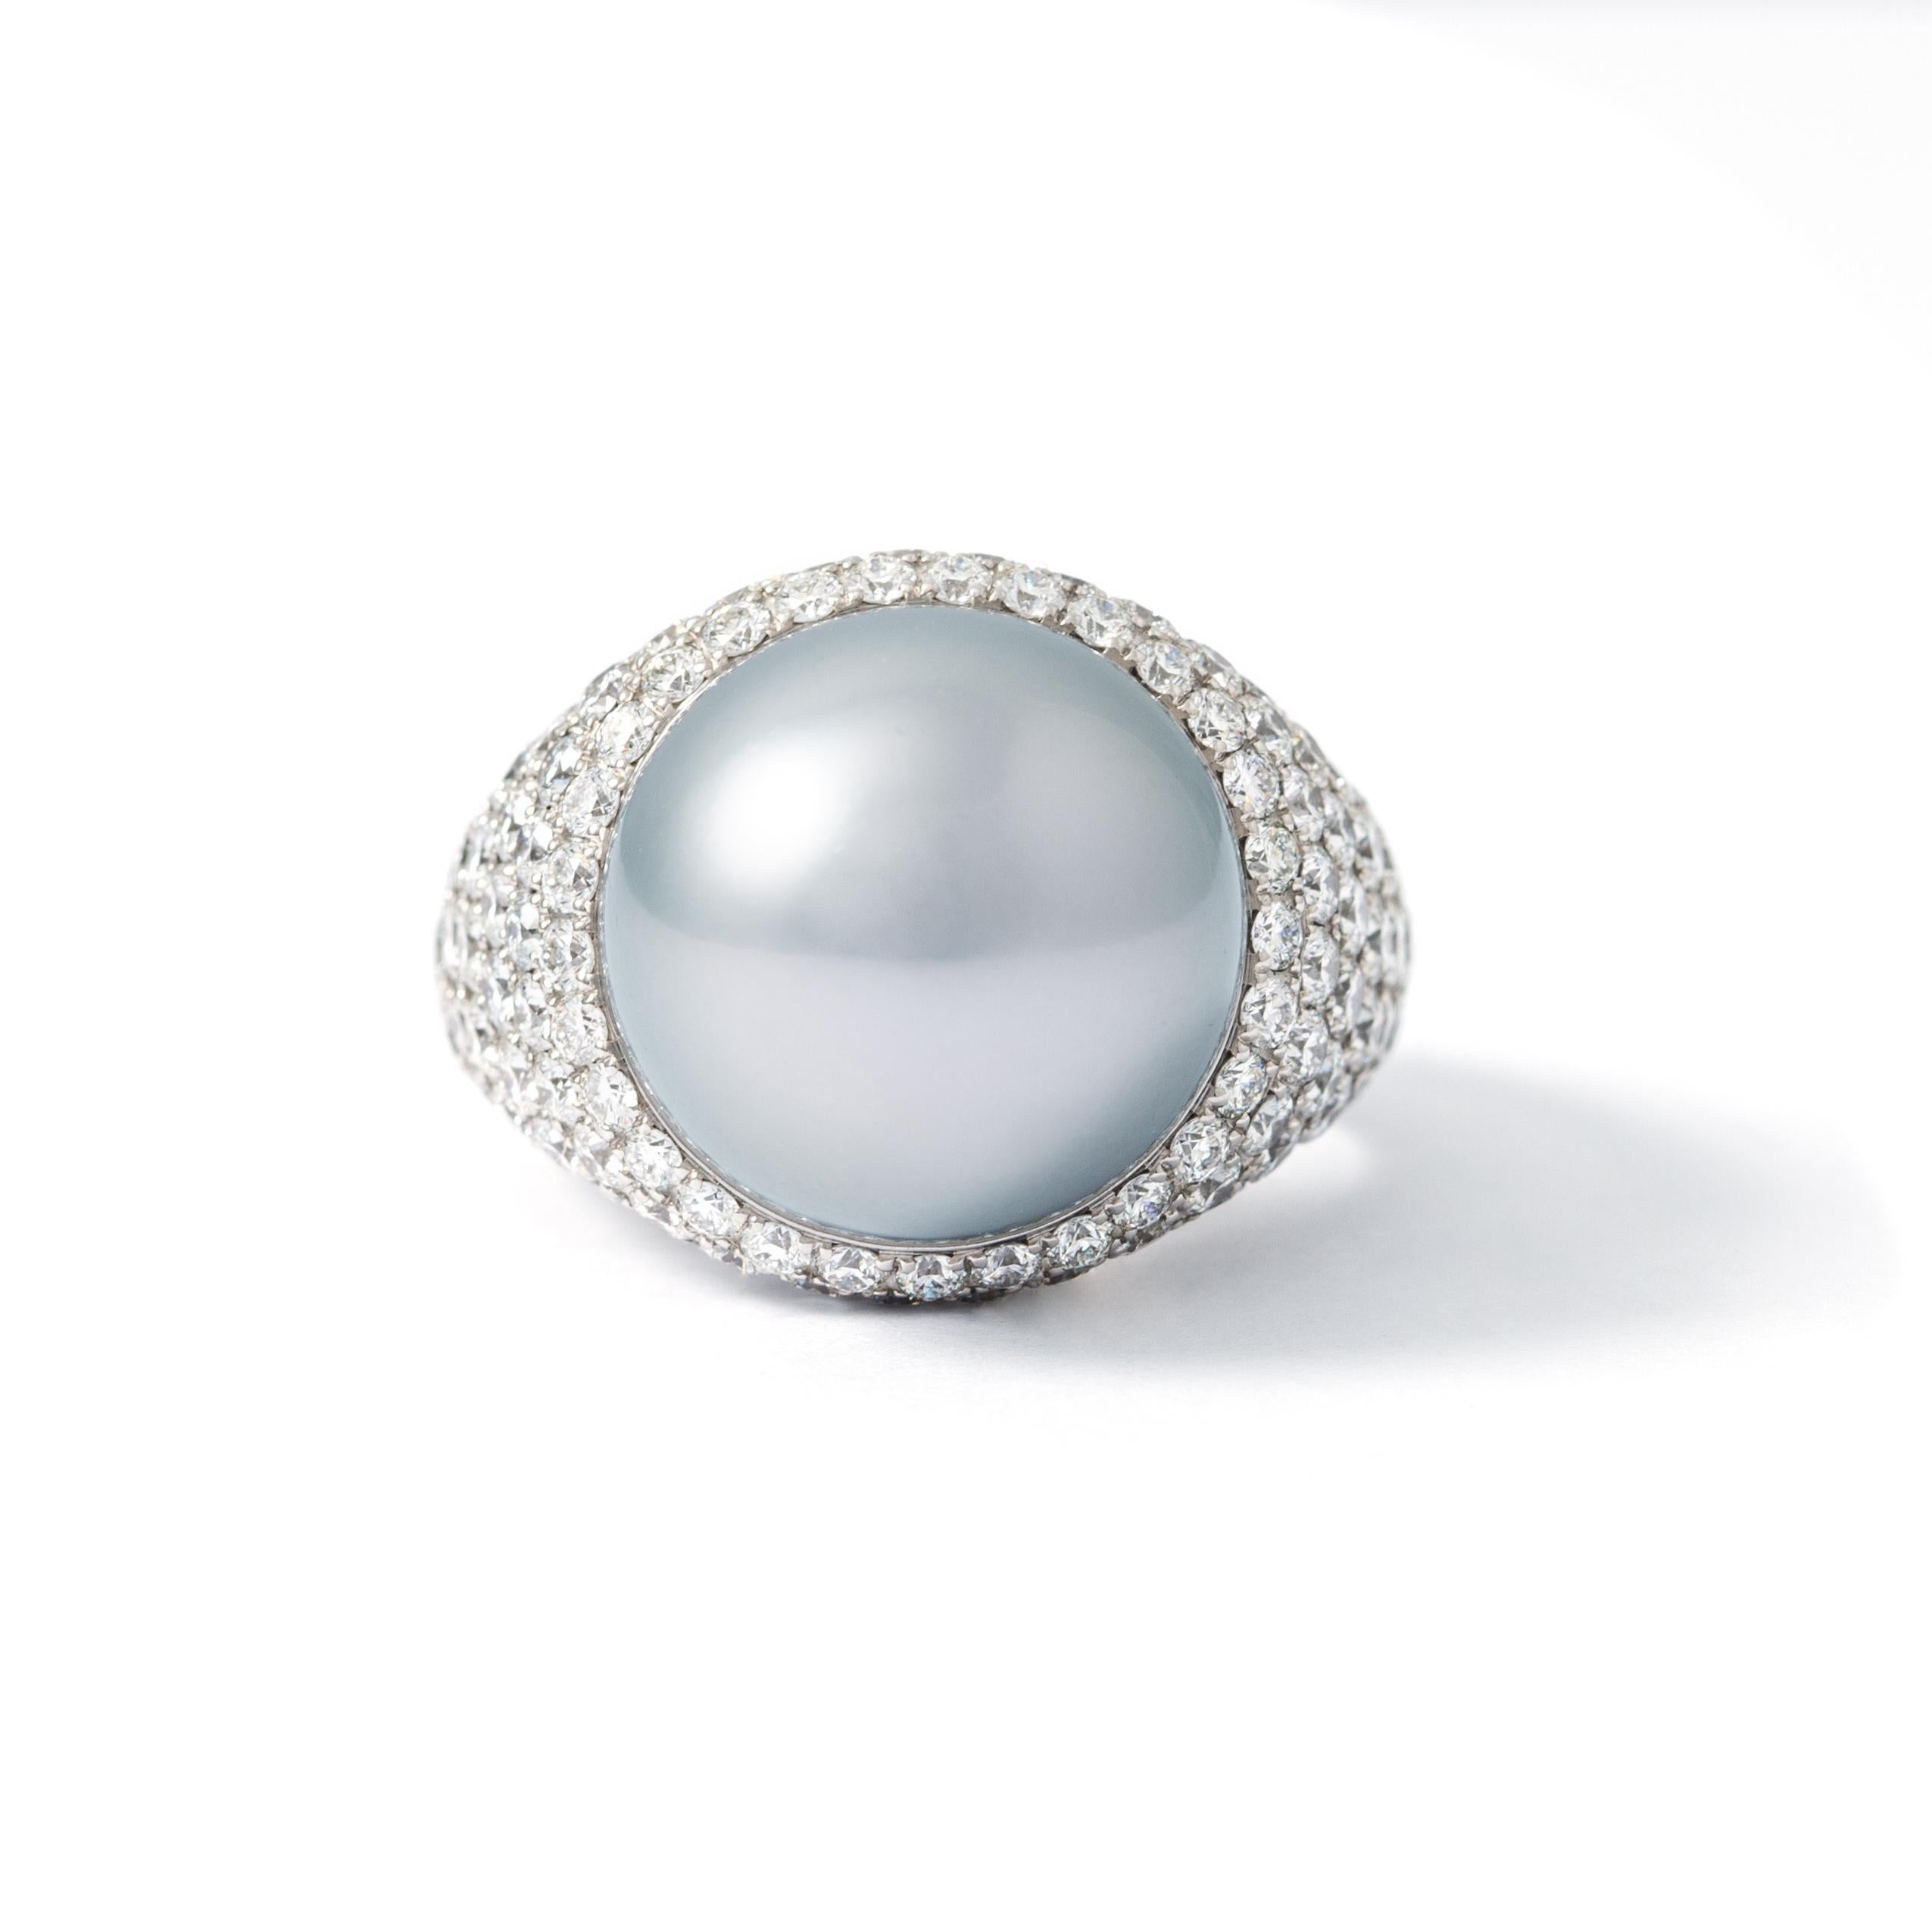 Ring in 18kt white gold set with one grey pearl and 151 diamonds 3.39 cts.
Size 55  